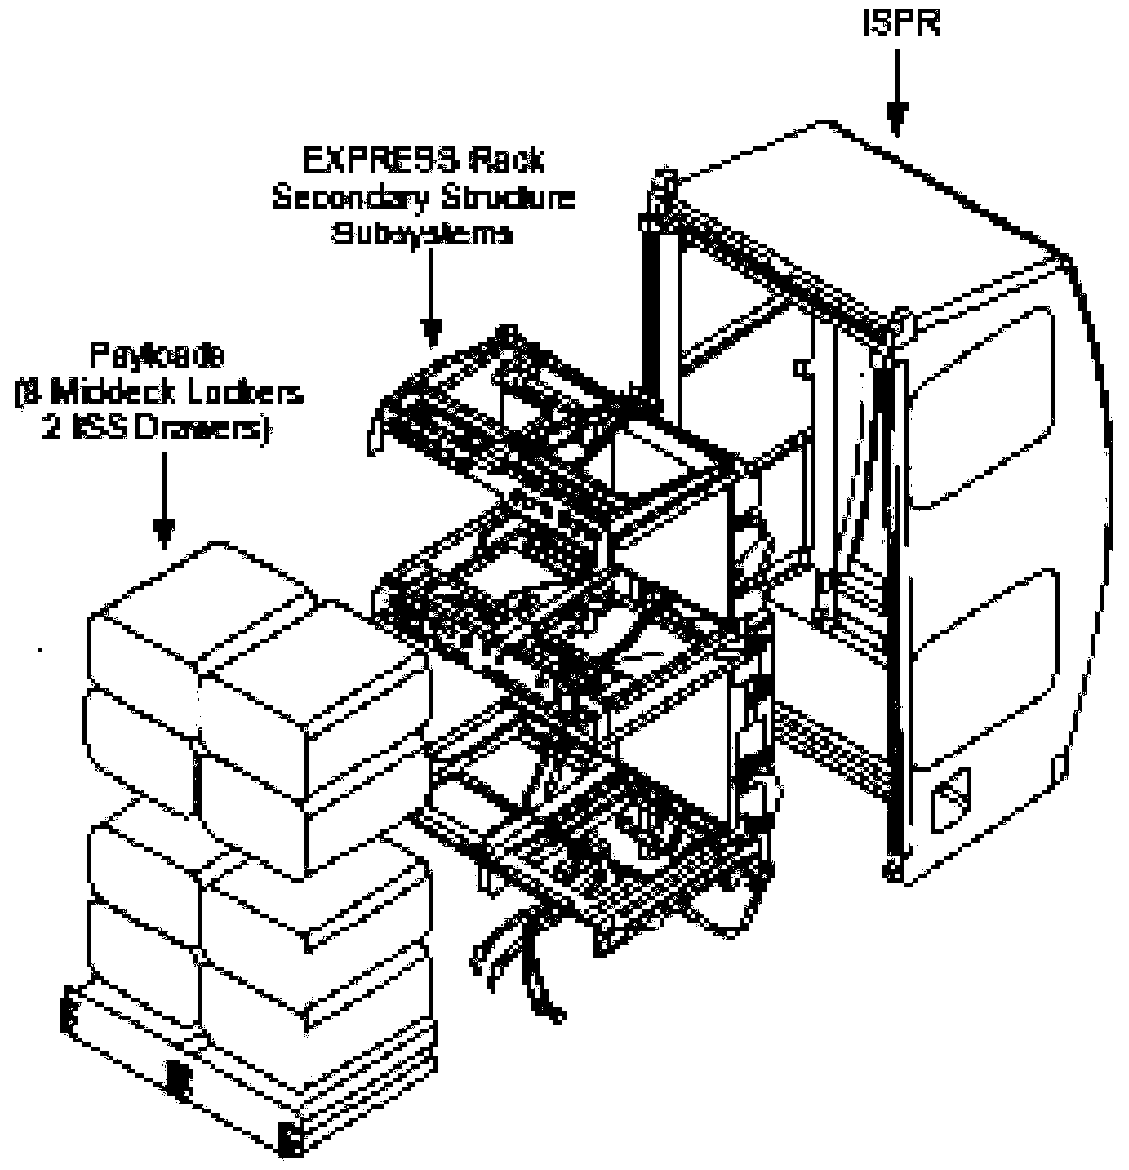 A passive vibration reduction method for a space science experiment cabinet